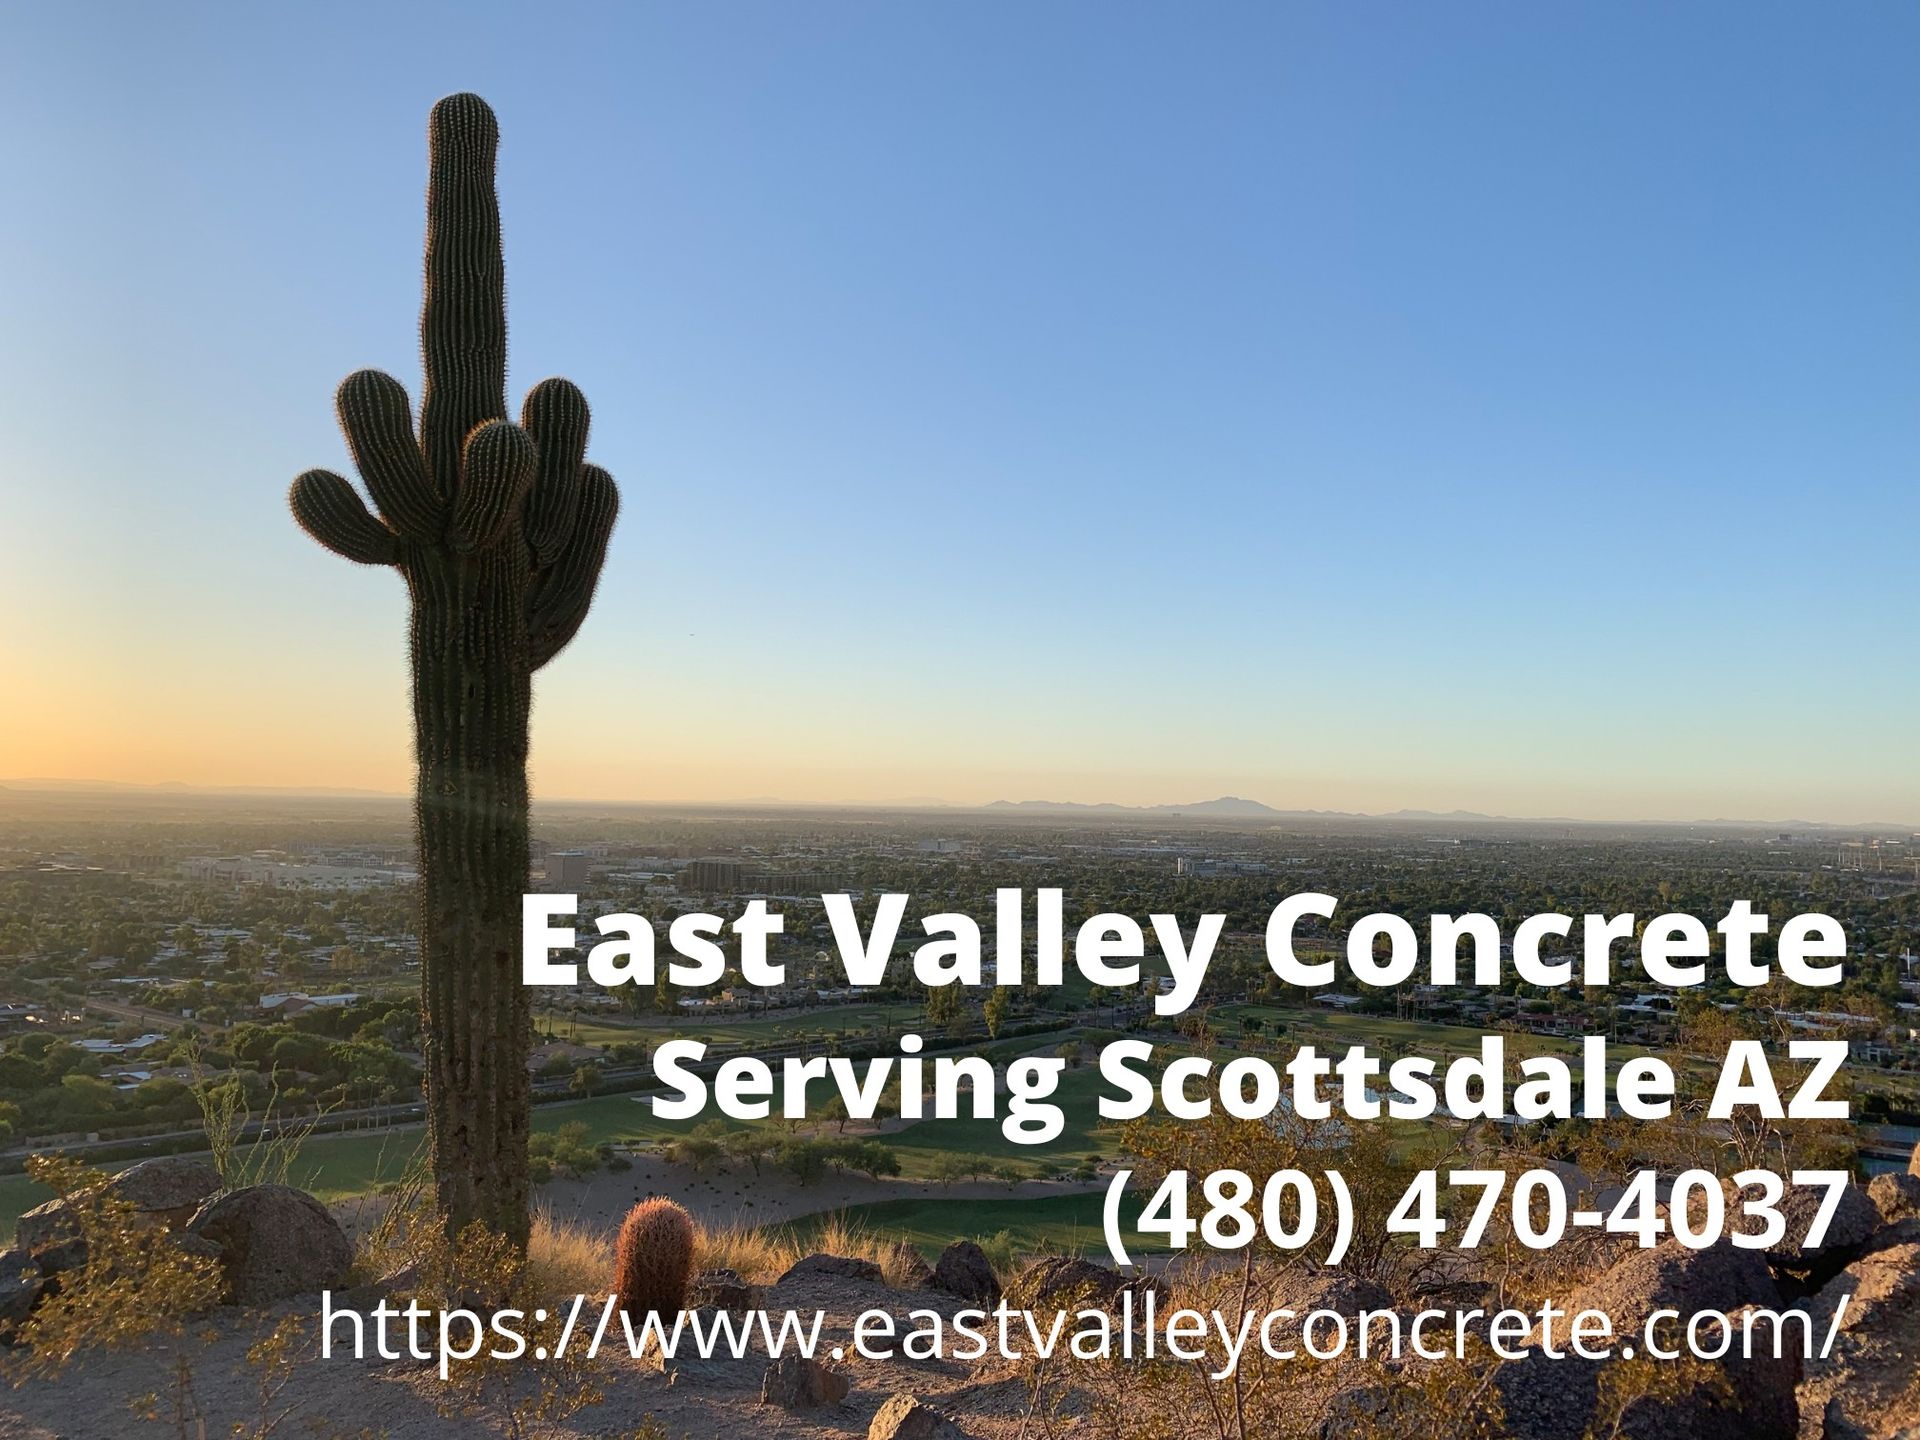 contact info of East Valley Concrete - a decorative concrete company serving Scottsdale AZ and the neighboring areas